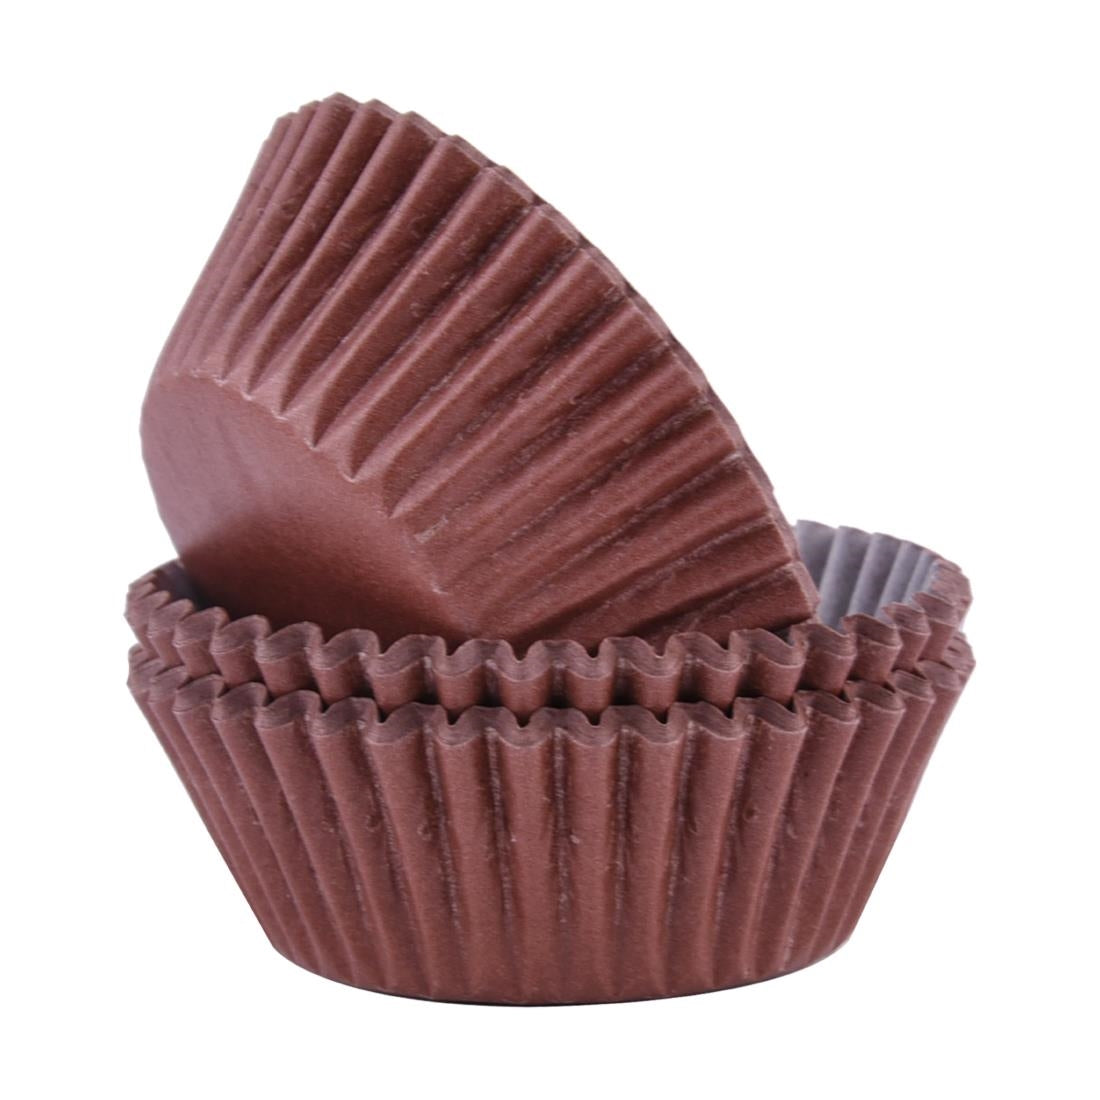 CX143 PME Block Colour Cupcake Cases Chocolate, Pack of 60 JD Catering Equipment Solutions Ltd